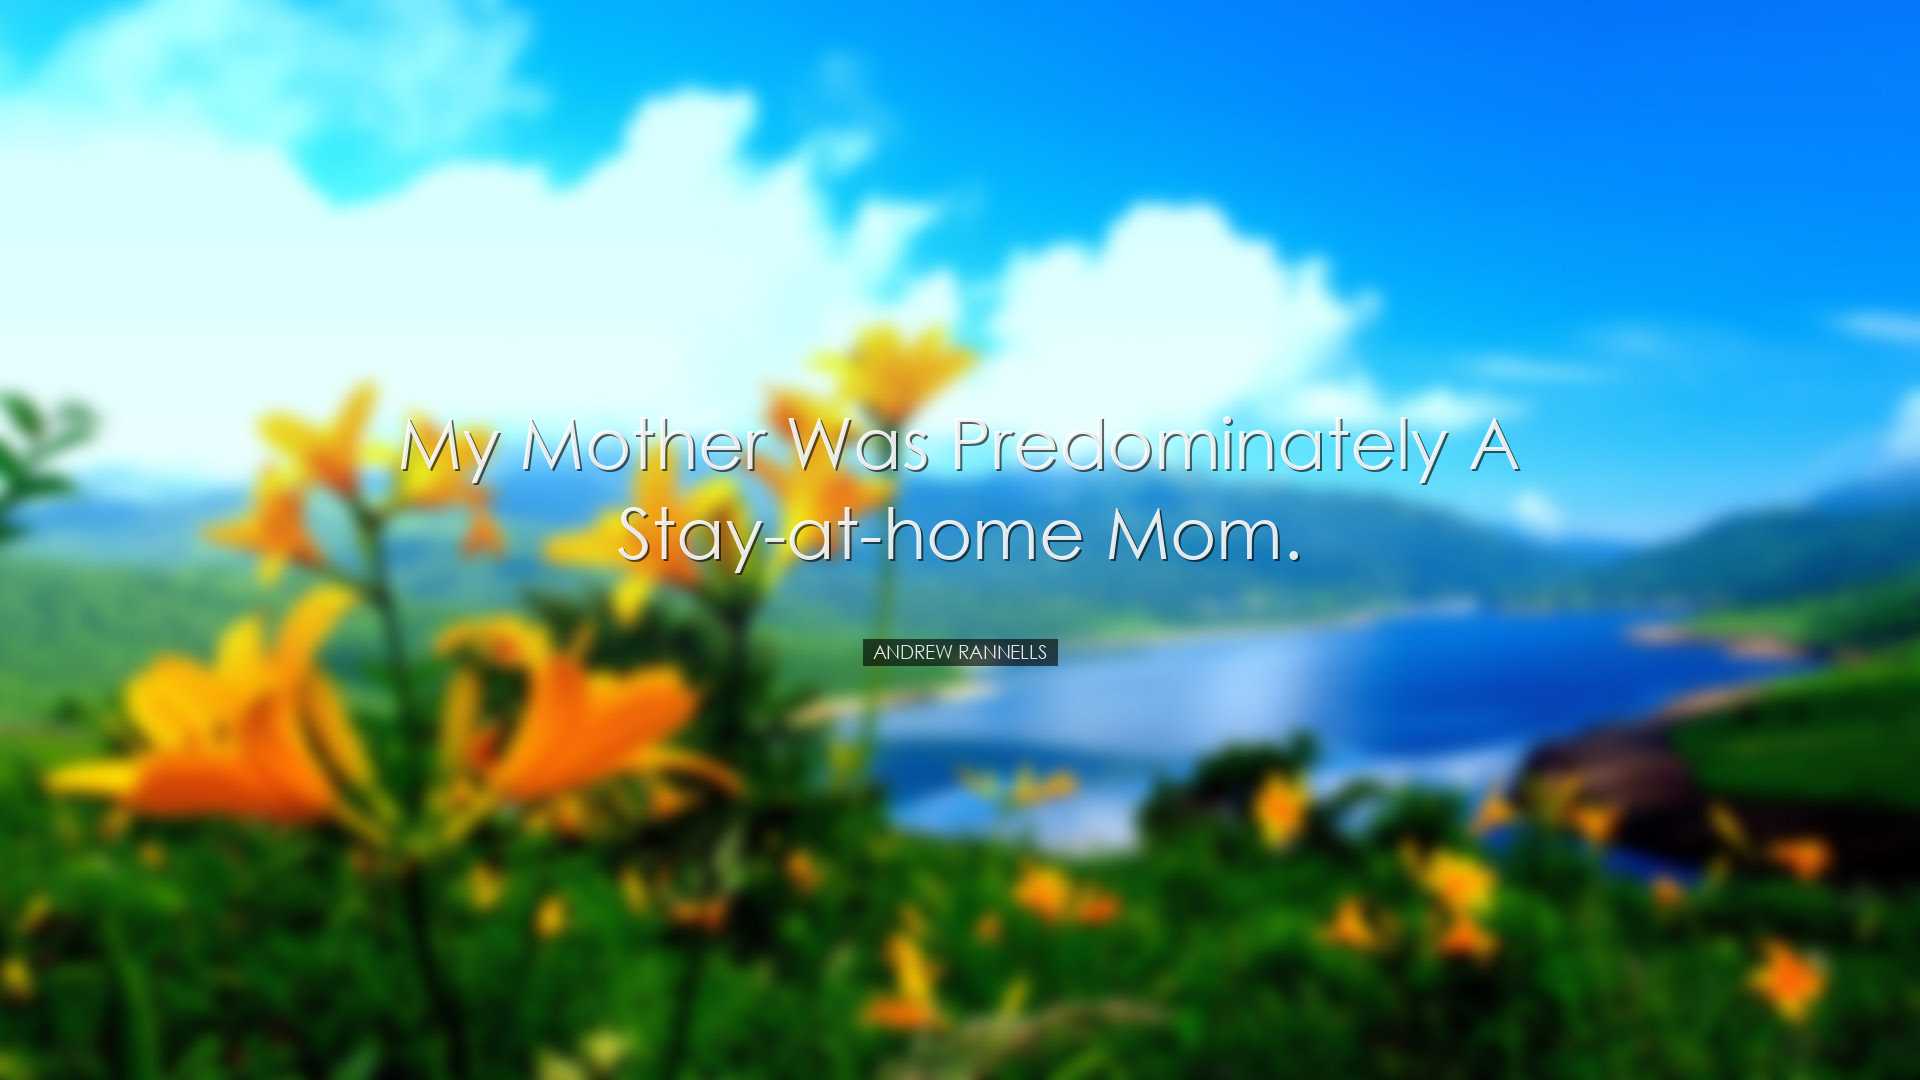 My mother was predominately a stay-at-home mom. - Andrew Rannells